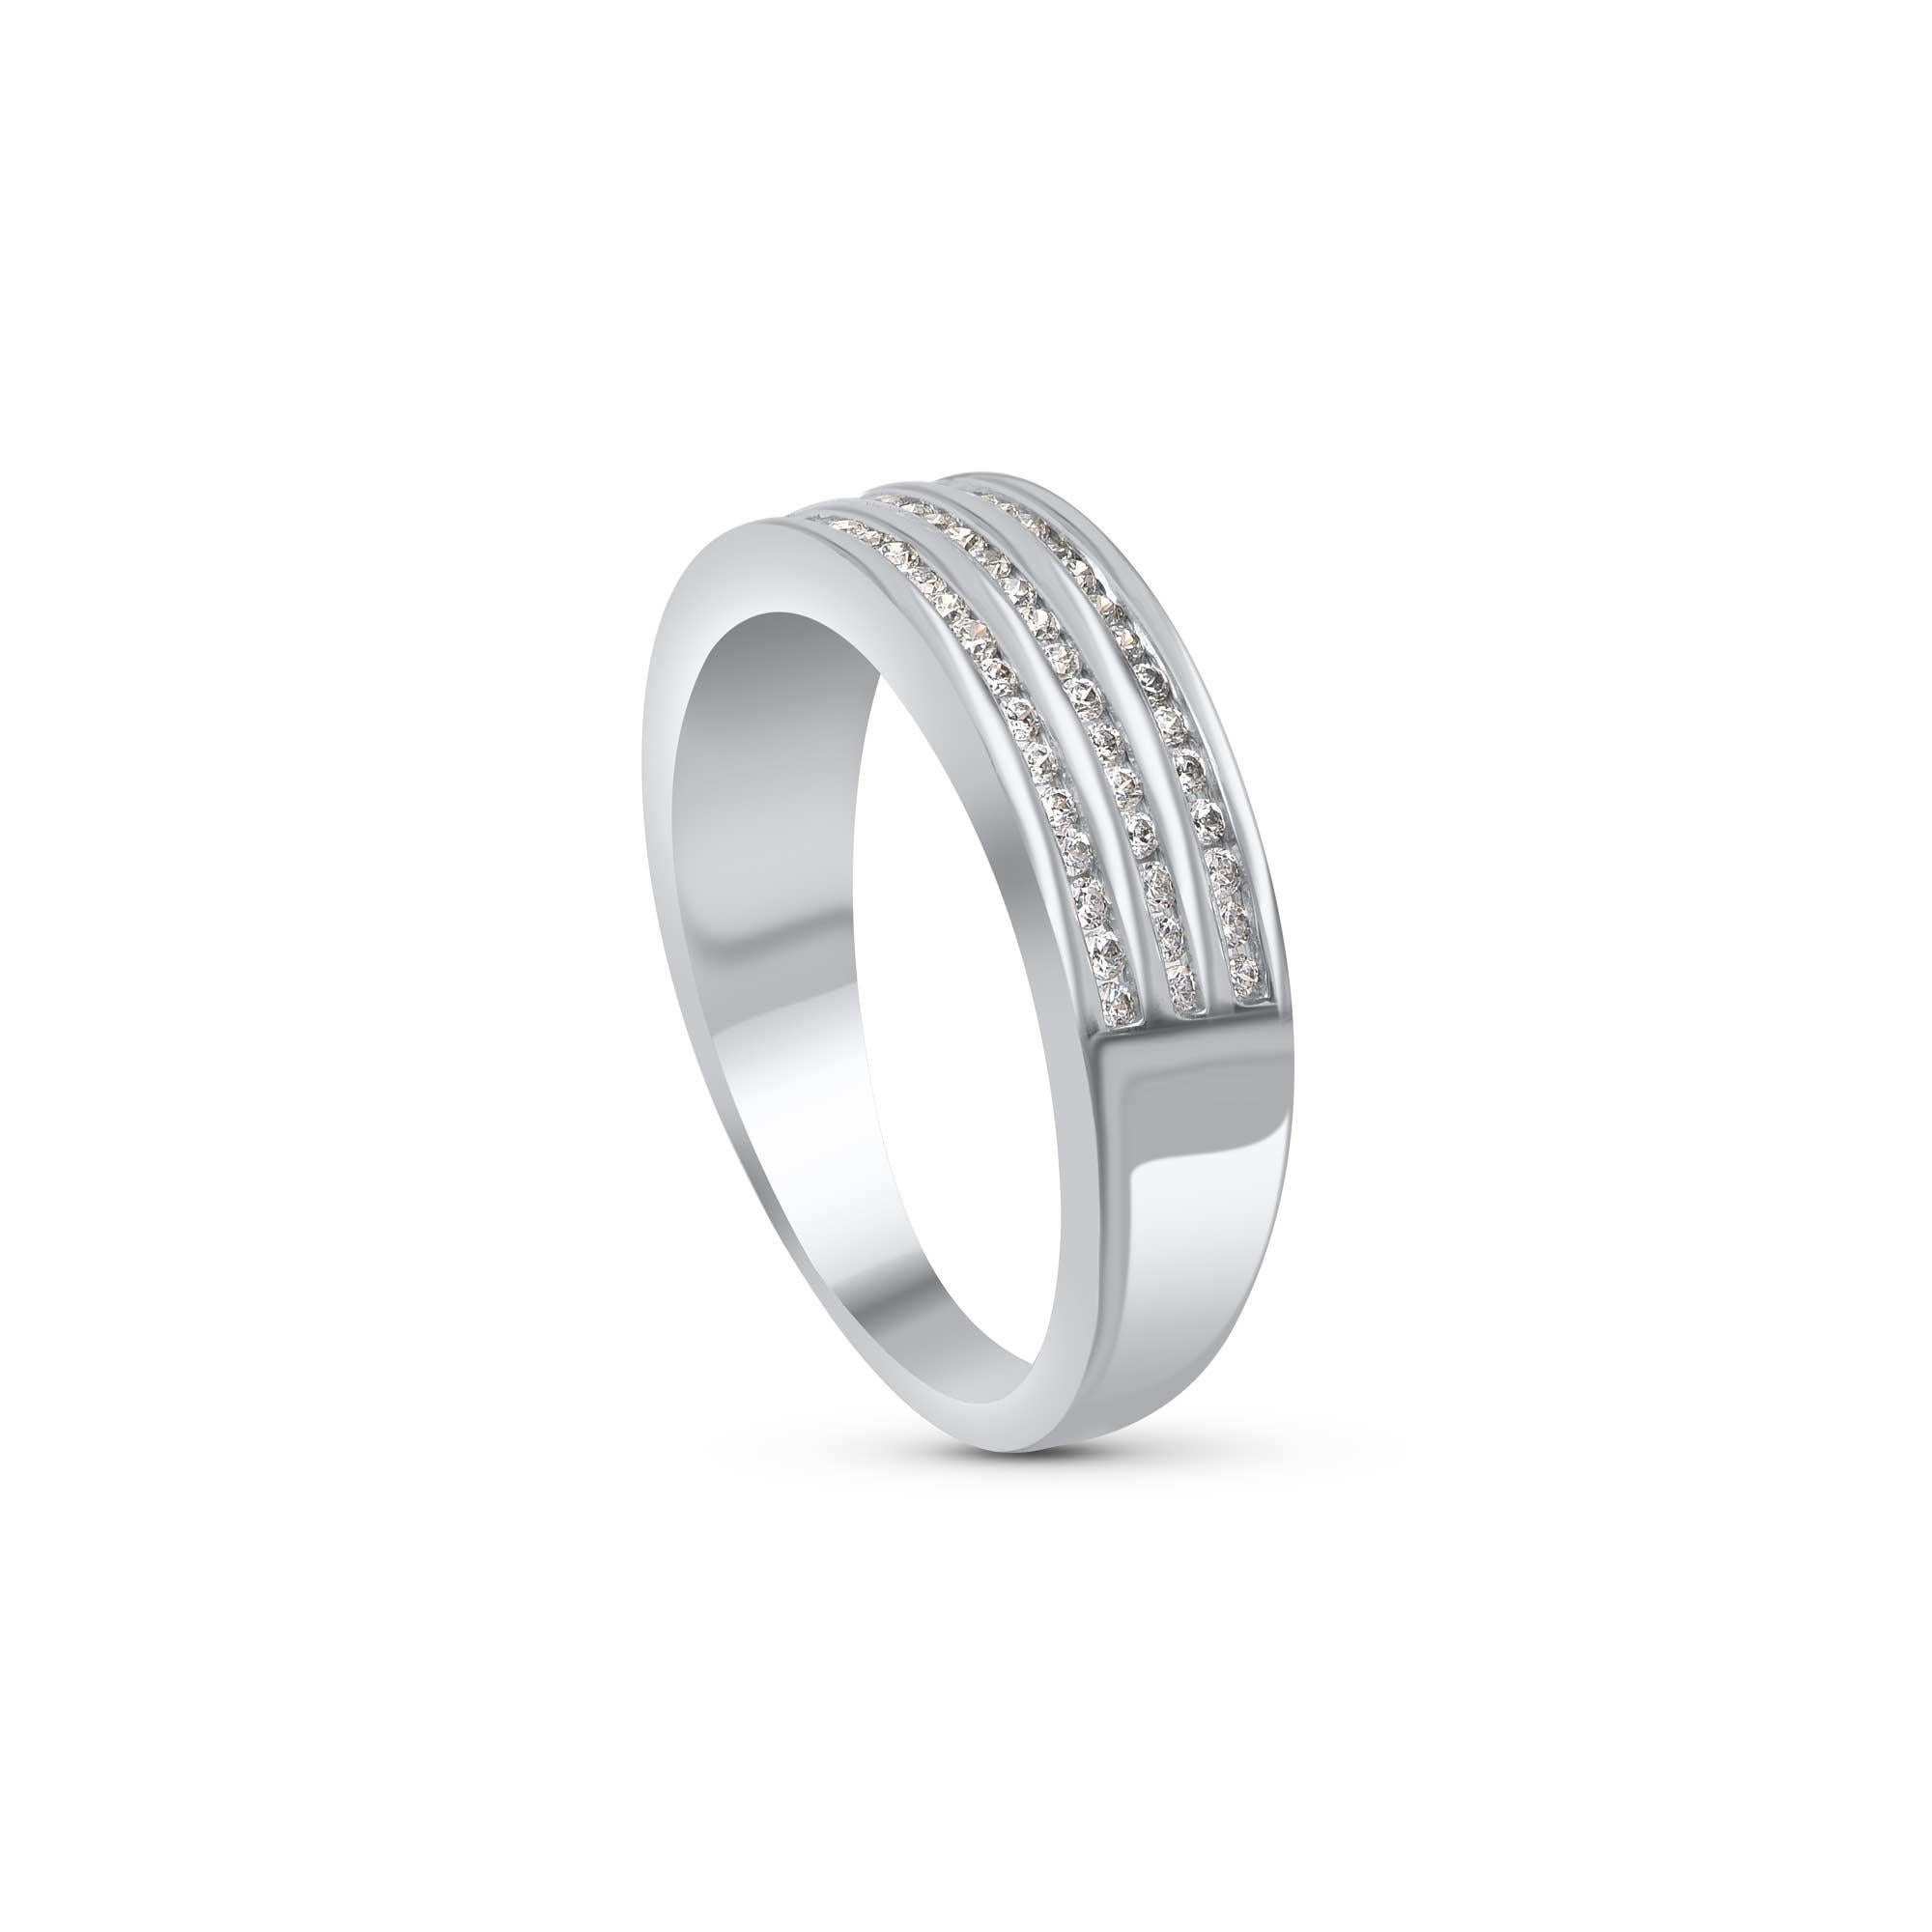 Elegantly designed this multi-row anniversary band is made with 66 brilliant natural diamond set in channel setting and hand-crafted by our in-house experts in 18 kt white gold. Diamonds are graded H-I Color, I2 Clarity. 

Metal color and ring size